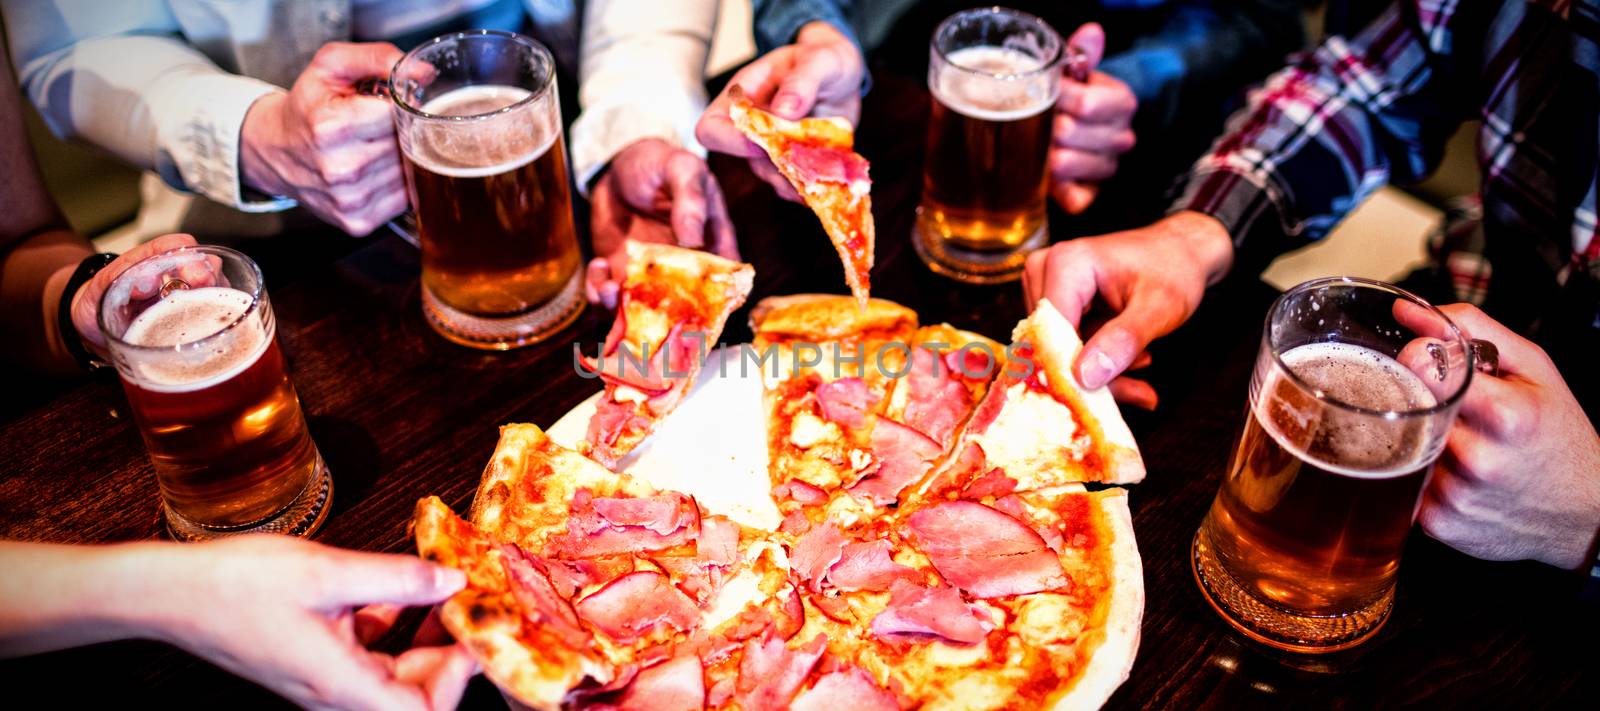 High angle view of friends with beer mug and pizza on table in bar